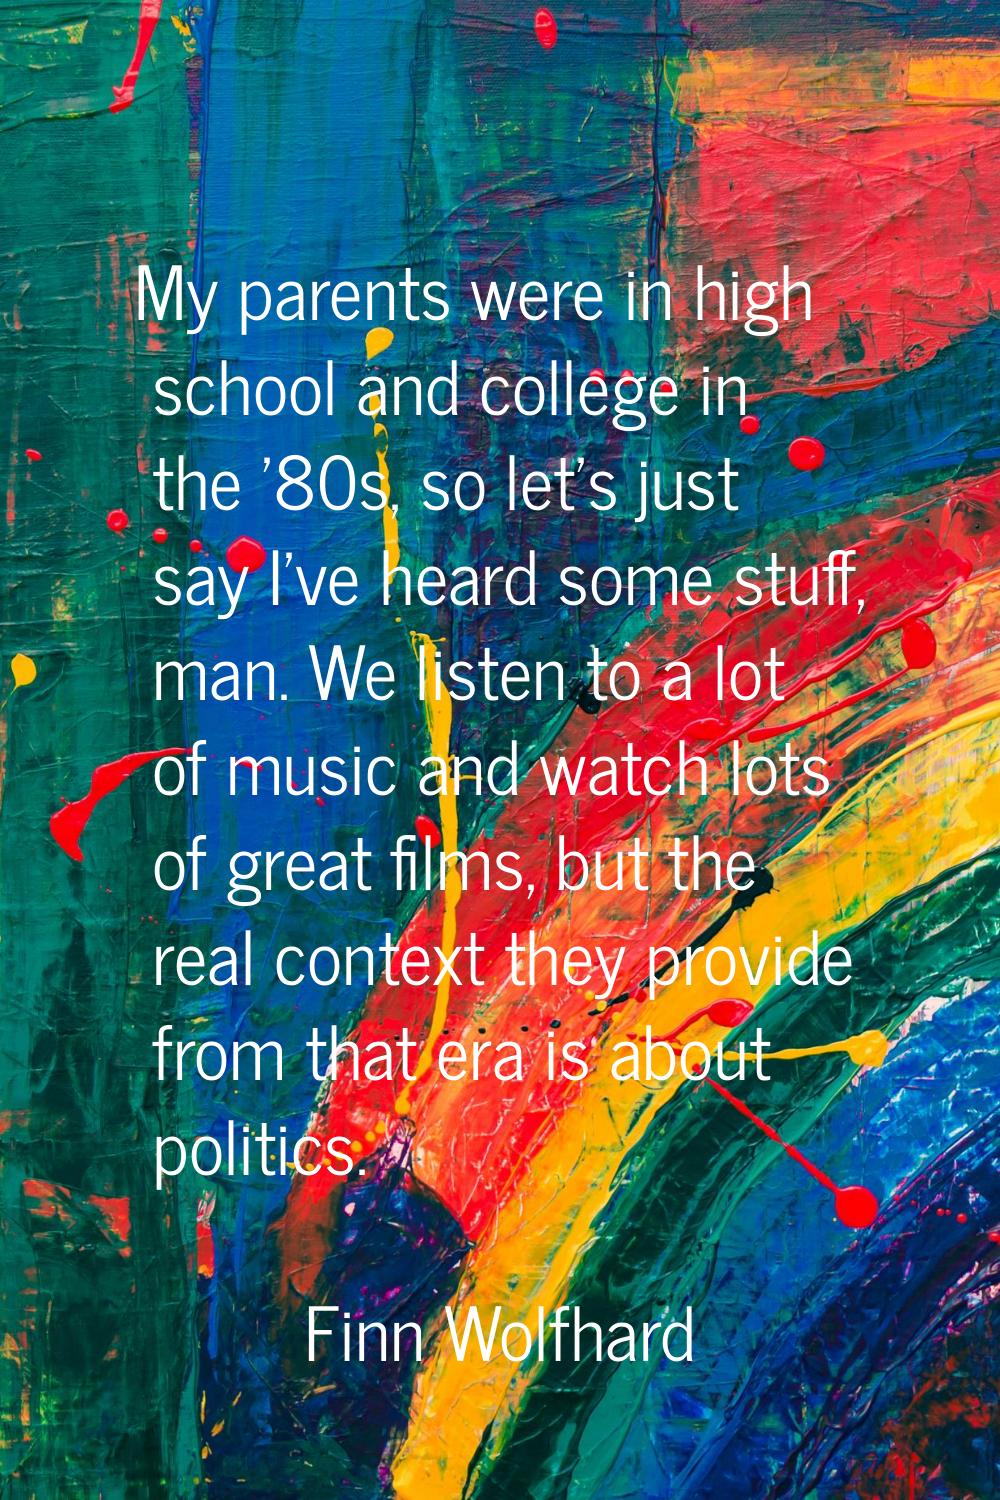 My parents were in high school and college in the '80s, so let's just say I've heard some stuff, ma